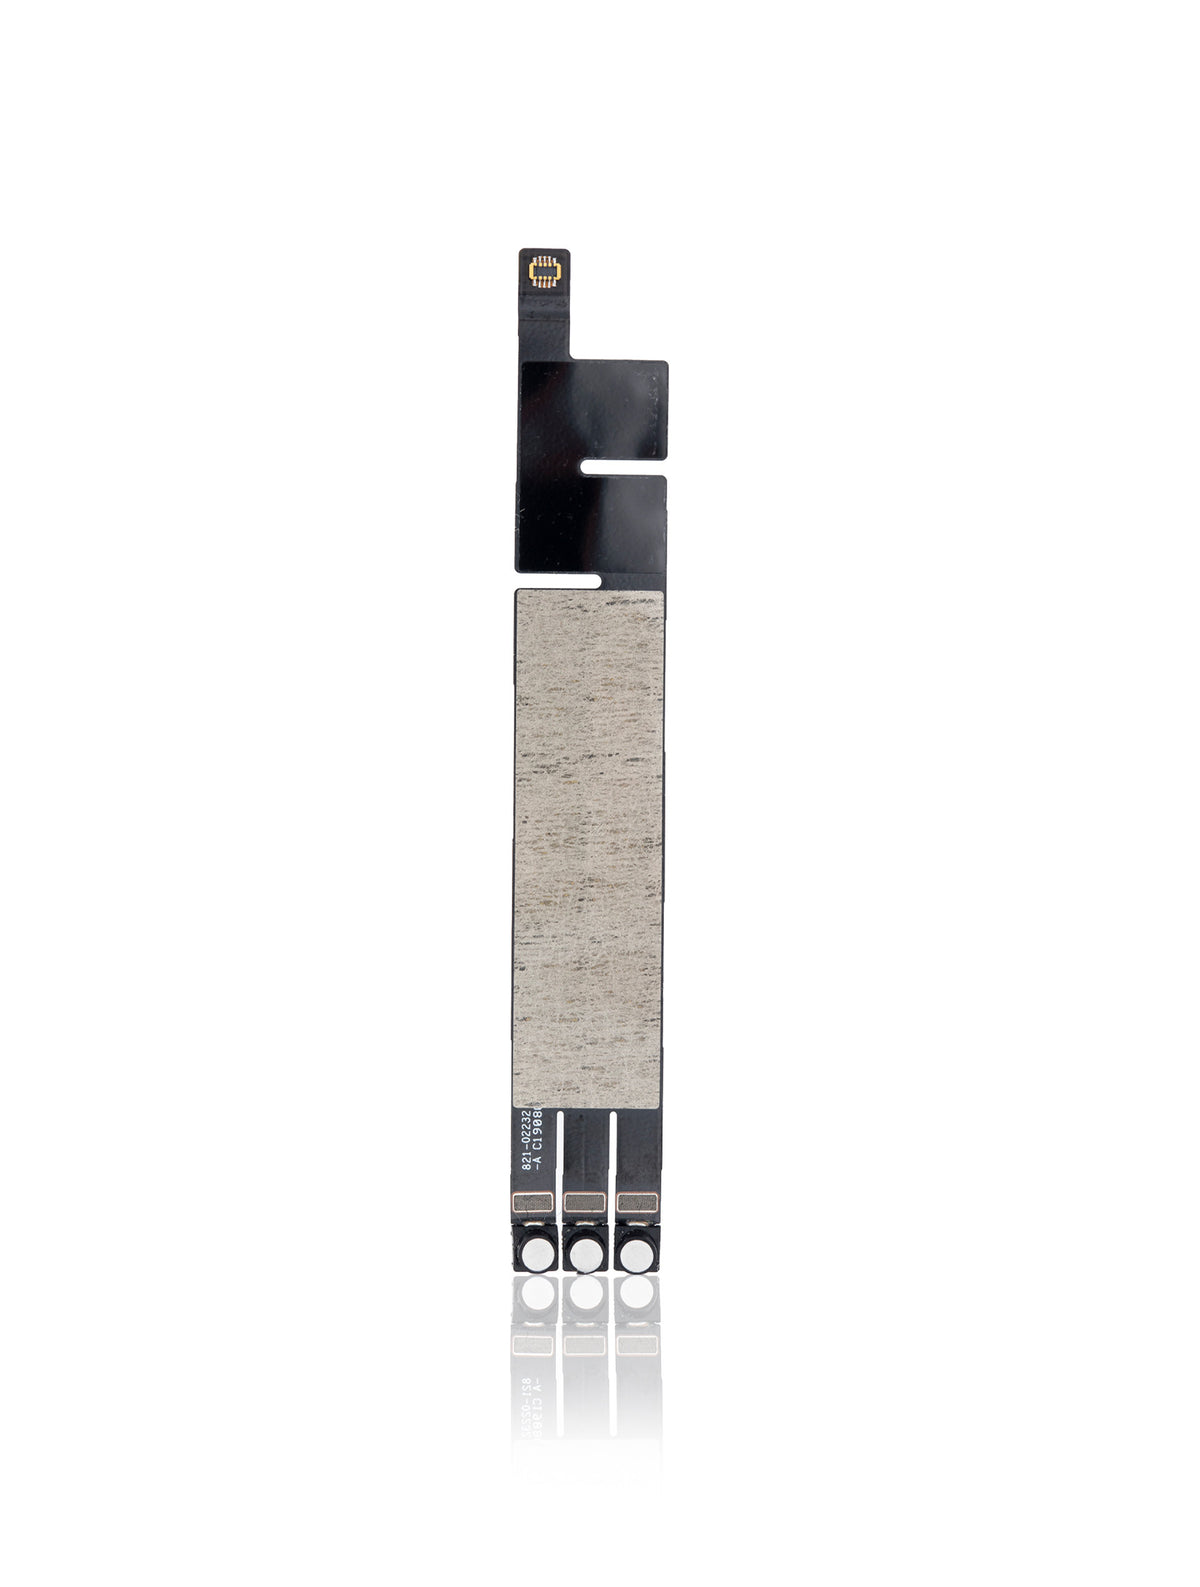 KEYBOARD FLEX CABLE (Black) COMPATIBLE WITH IPAD AIR 3